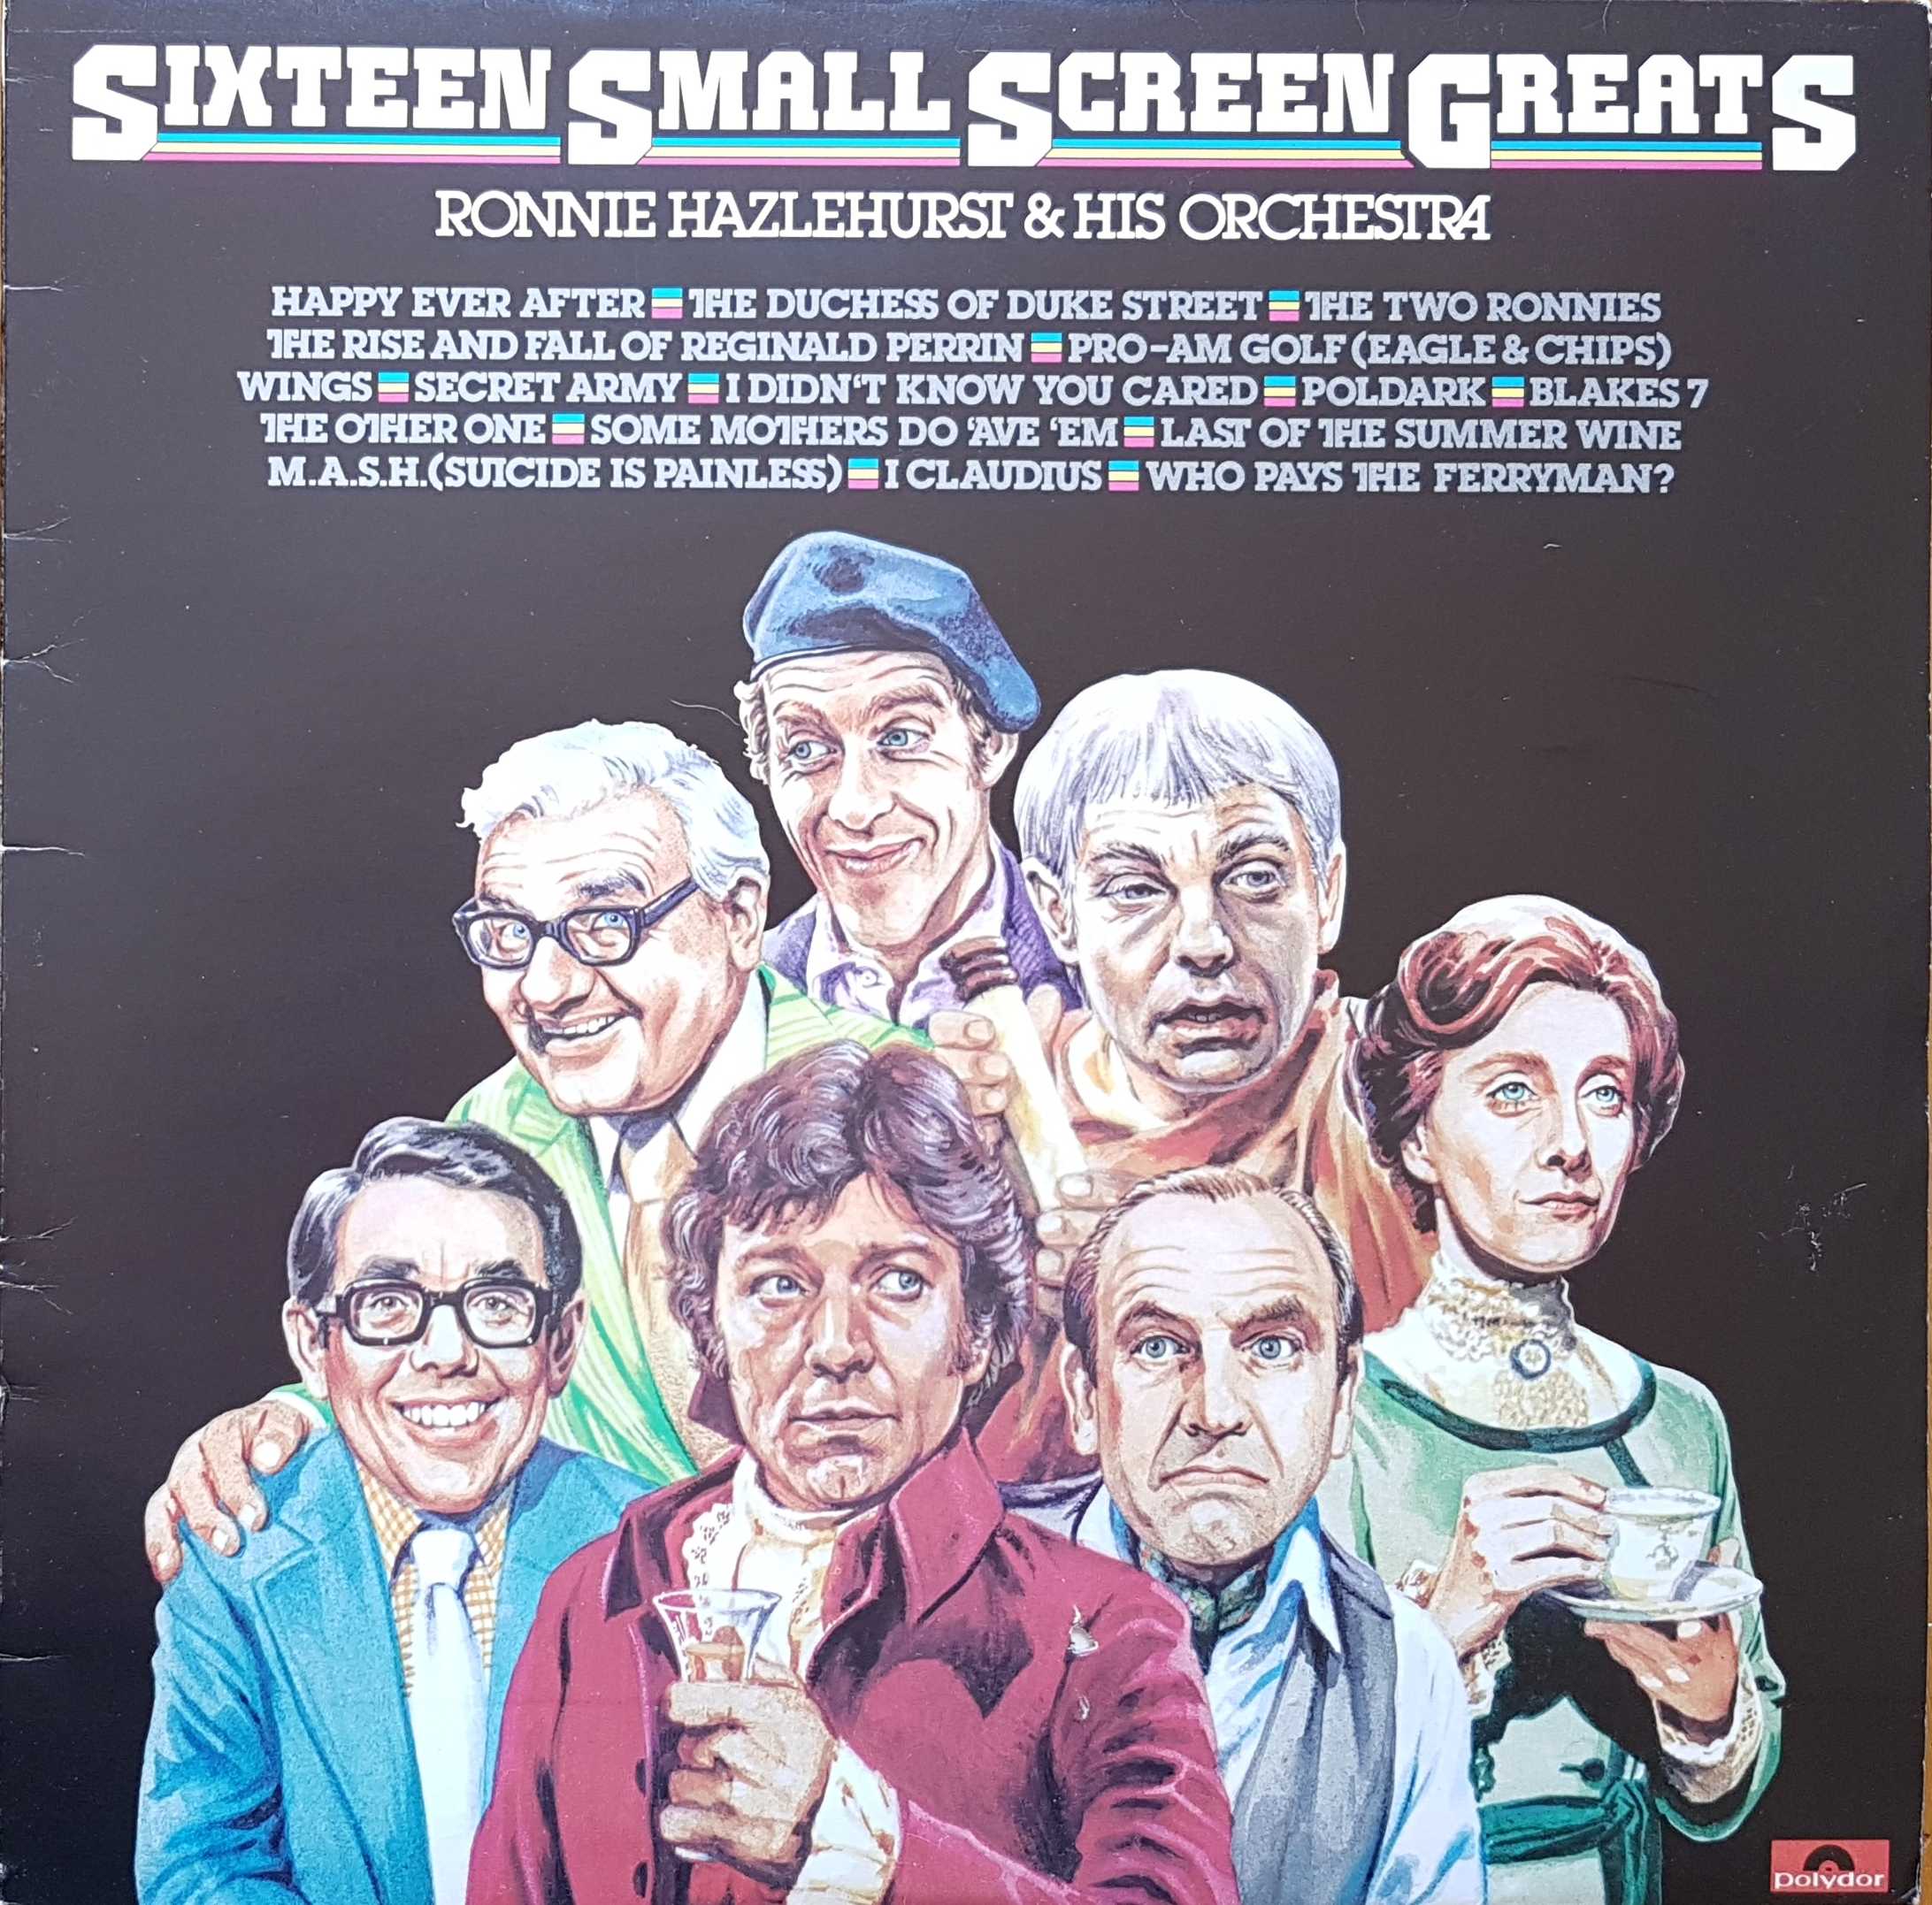 Picture of 2384 107 Sixteen small screen gems by artist Ronnie Hazlehurst & his orchestra from ITV, Channel 4 and Channel 5 albums library